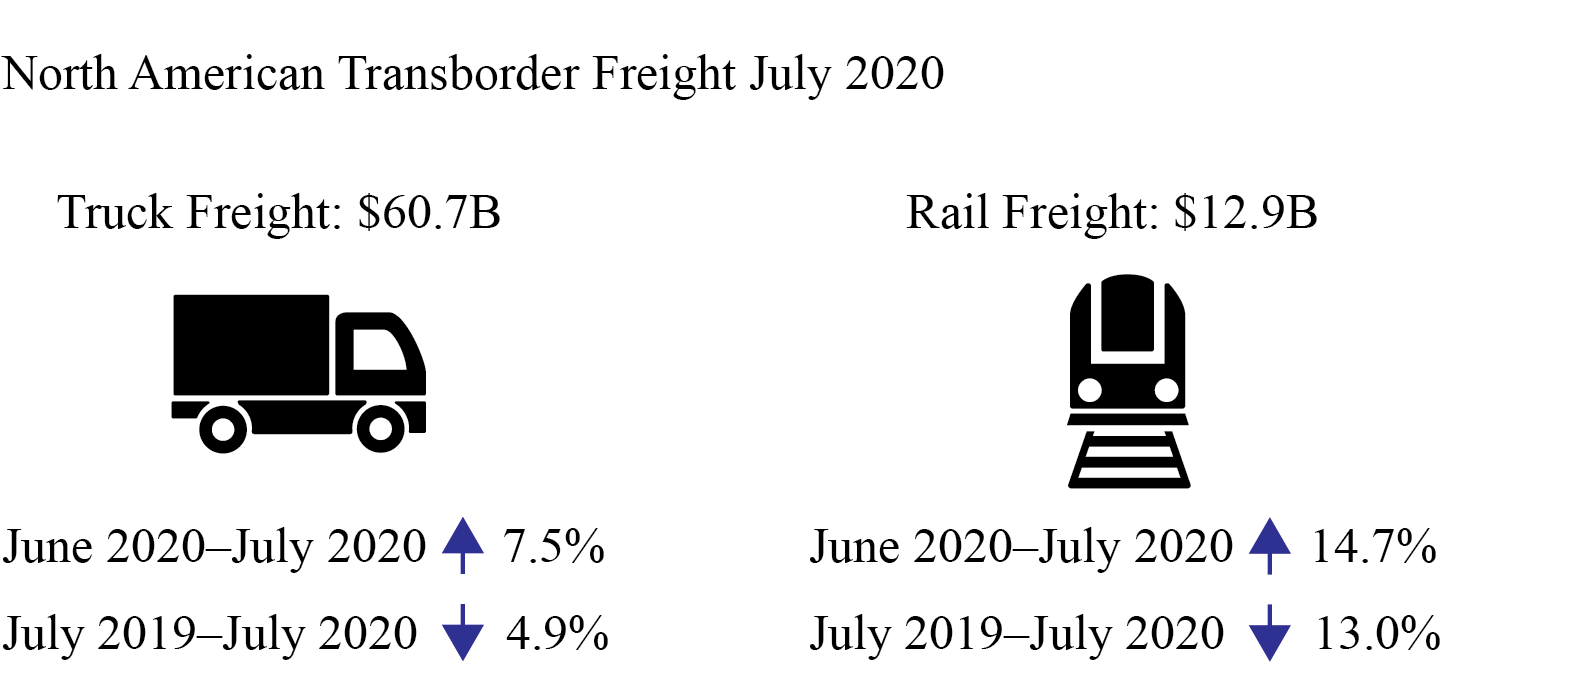 North American Freight Data, July 2020